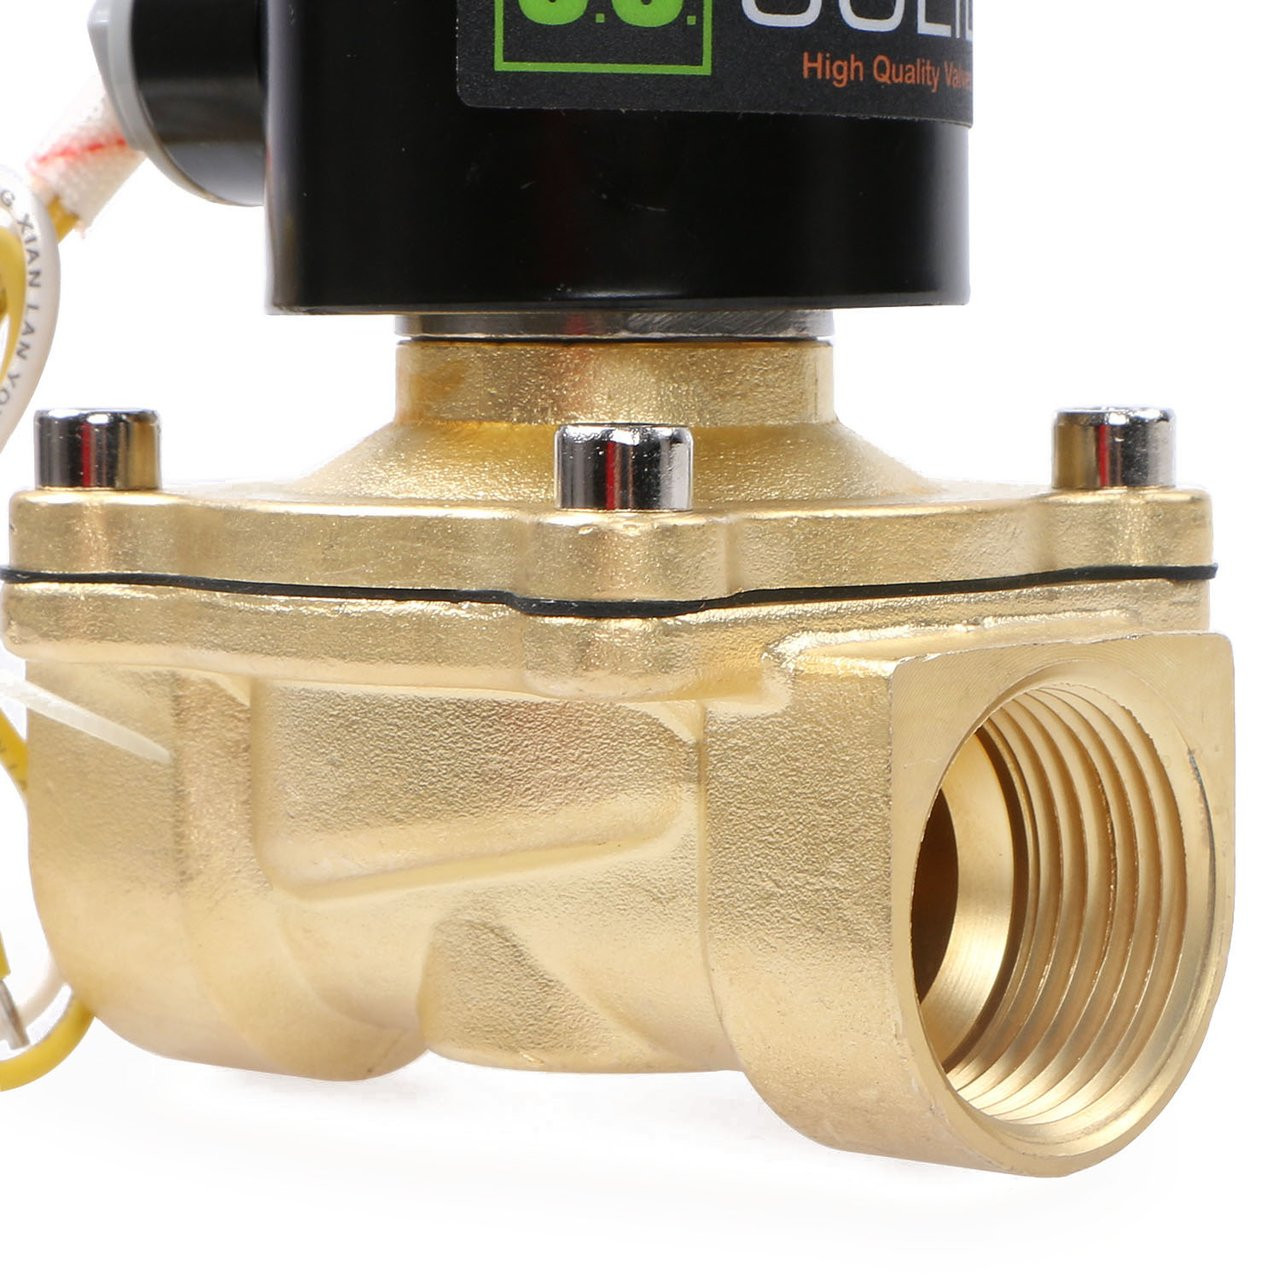 AC110V G1 Pilot Solenoid Valve Normally Closed Valve Two-Port Practical Electric Water Valve Two-Position Brass for Gas Solenoid Valve Oil Air Plumbing Equipment